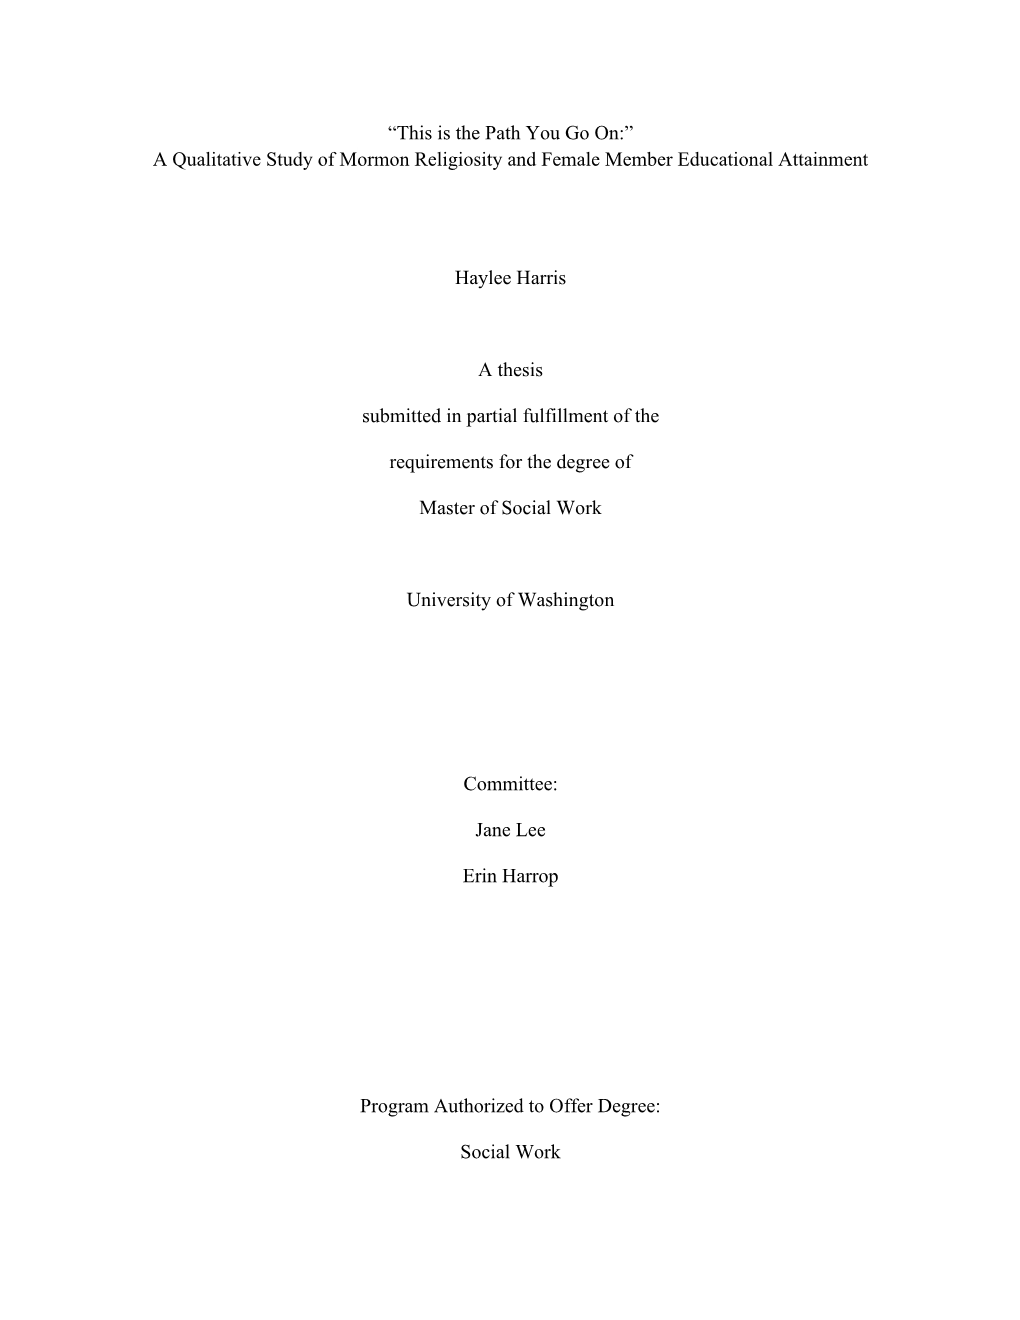 “This Is the Path You Go On:” a Qualitative Study of Mormon Religiosity and Female Member Educational Attainment